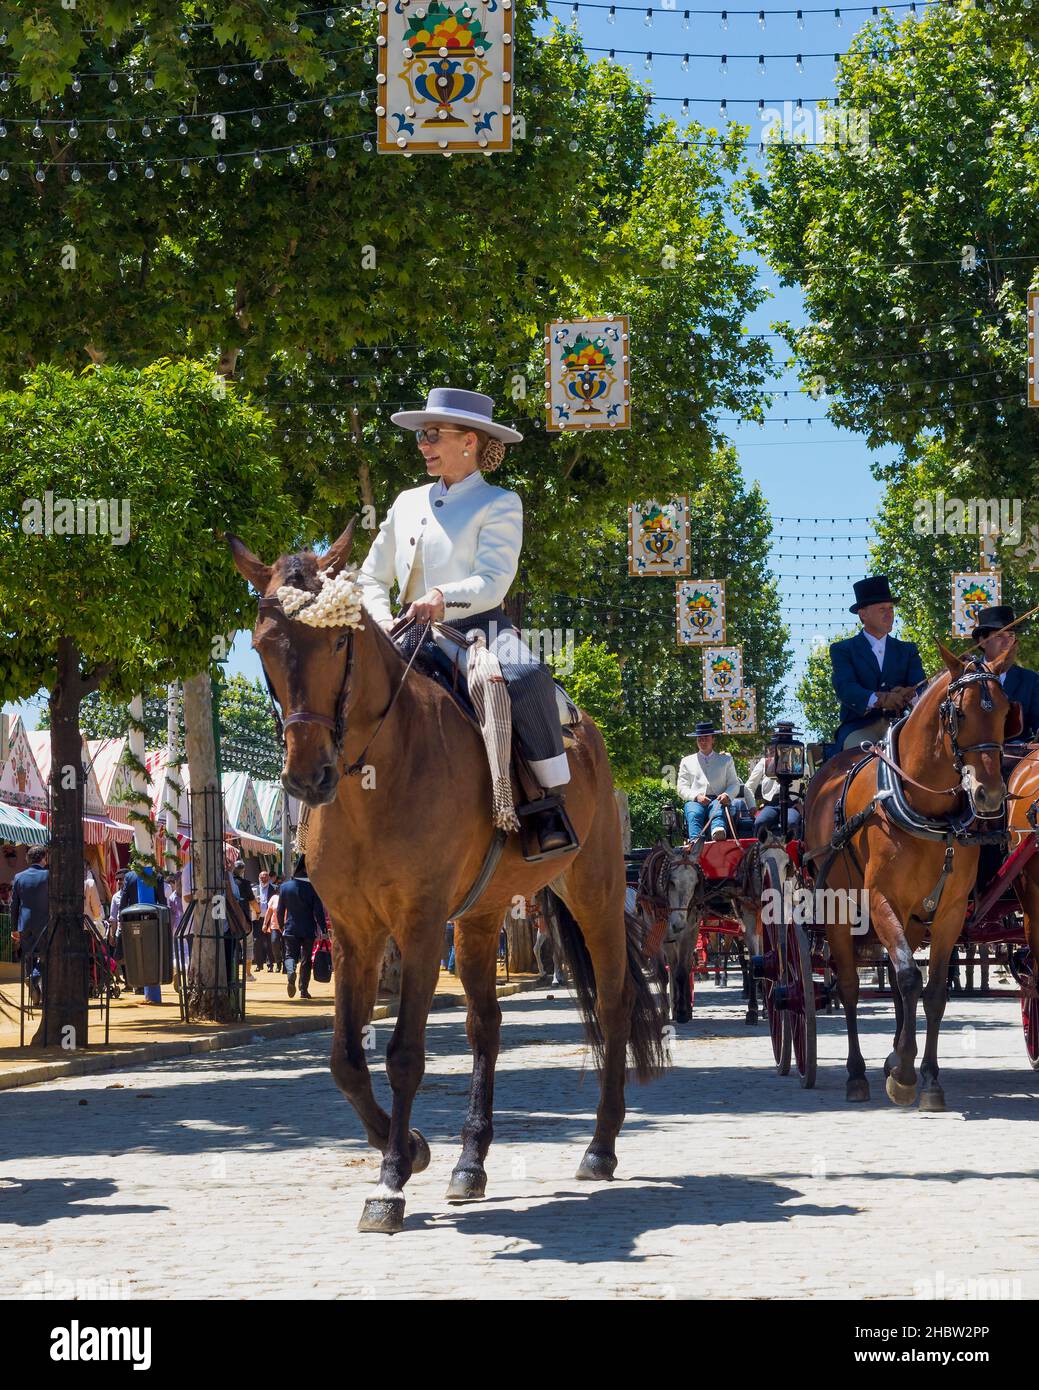 Seville, Seville Province, Andalusia, southern Spain.  Feria de Abril, the April Fair.  Horse and carriage parade.  Mature woman rider in traditional Stock Photo